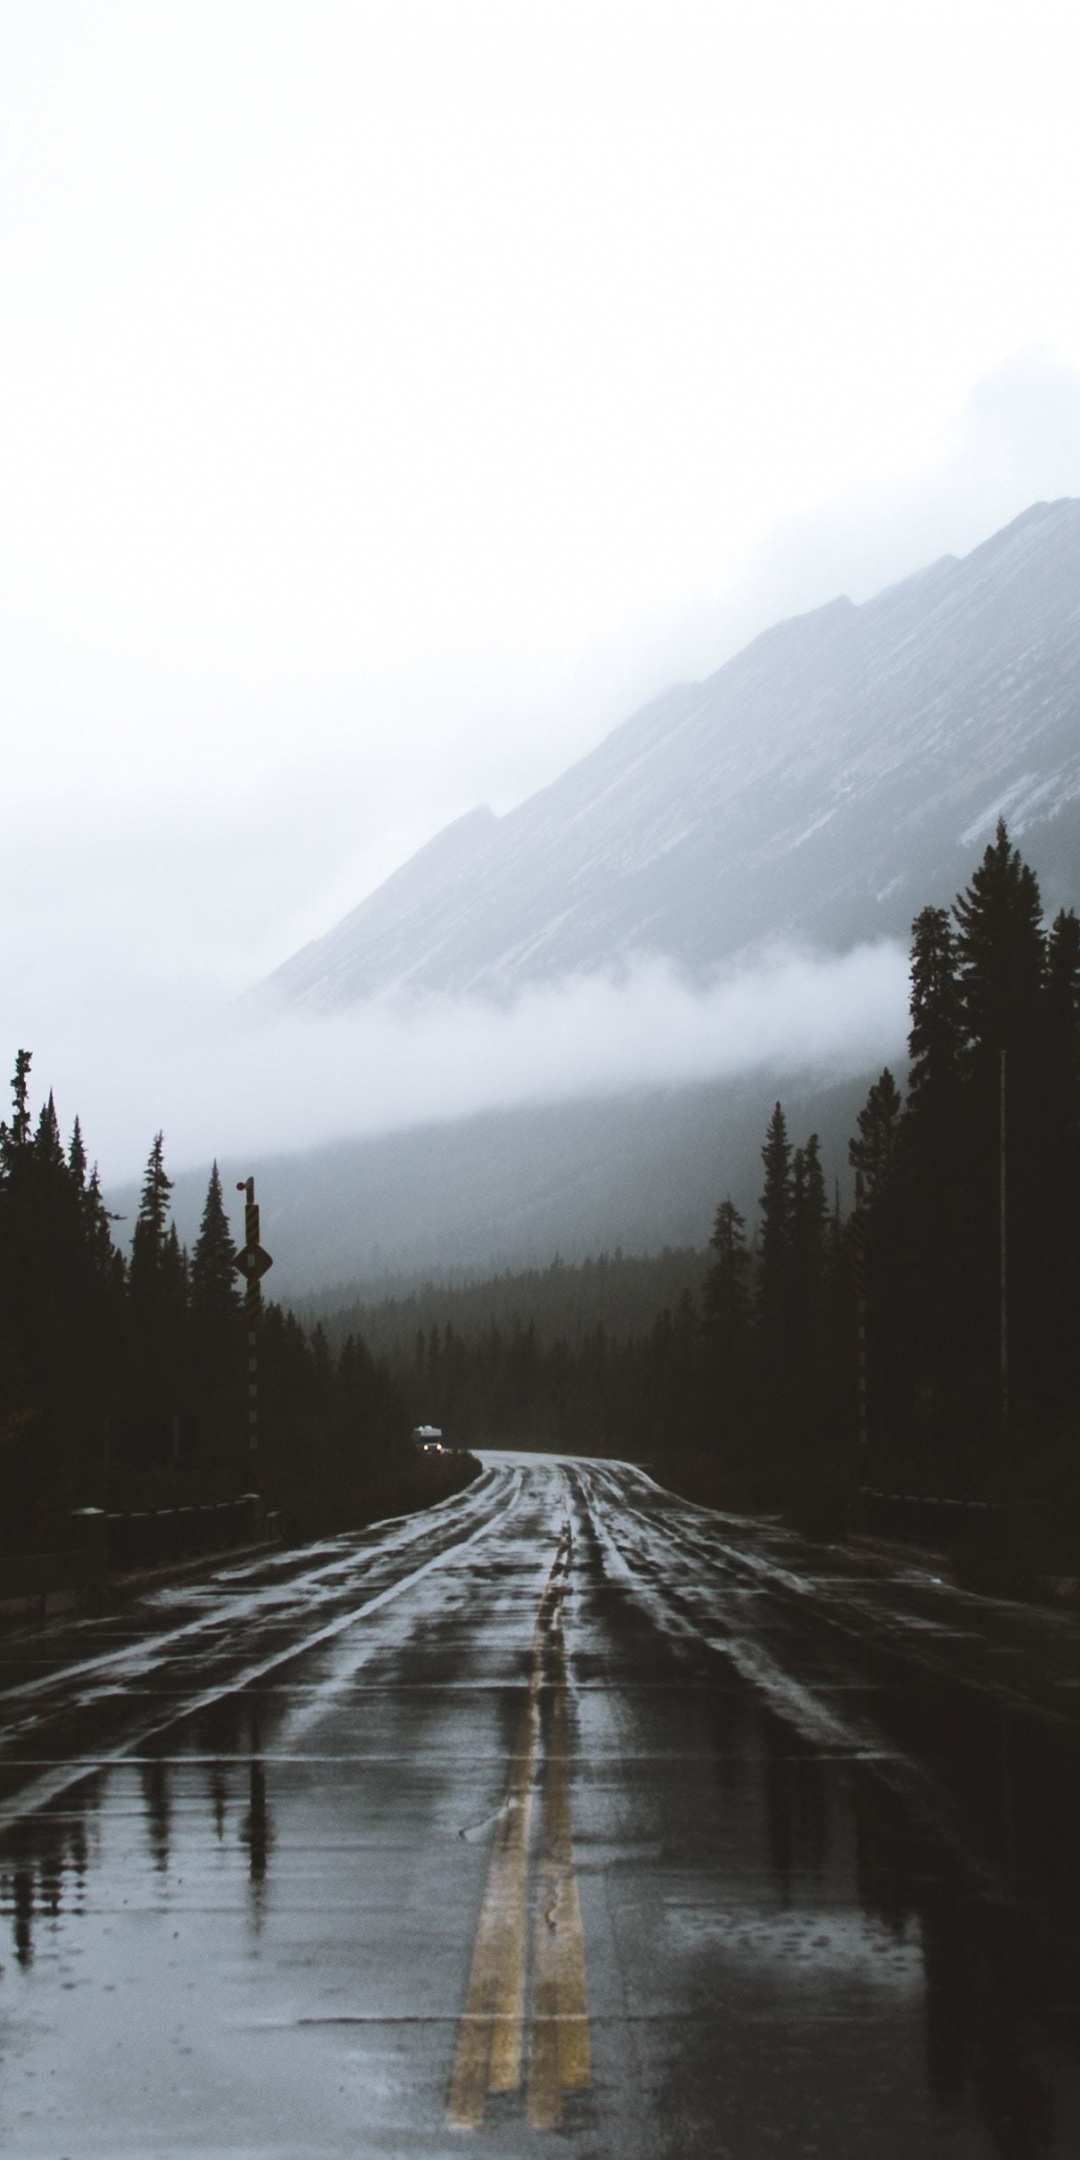 A road that is wet and empty - Rain, forest, fog, road